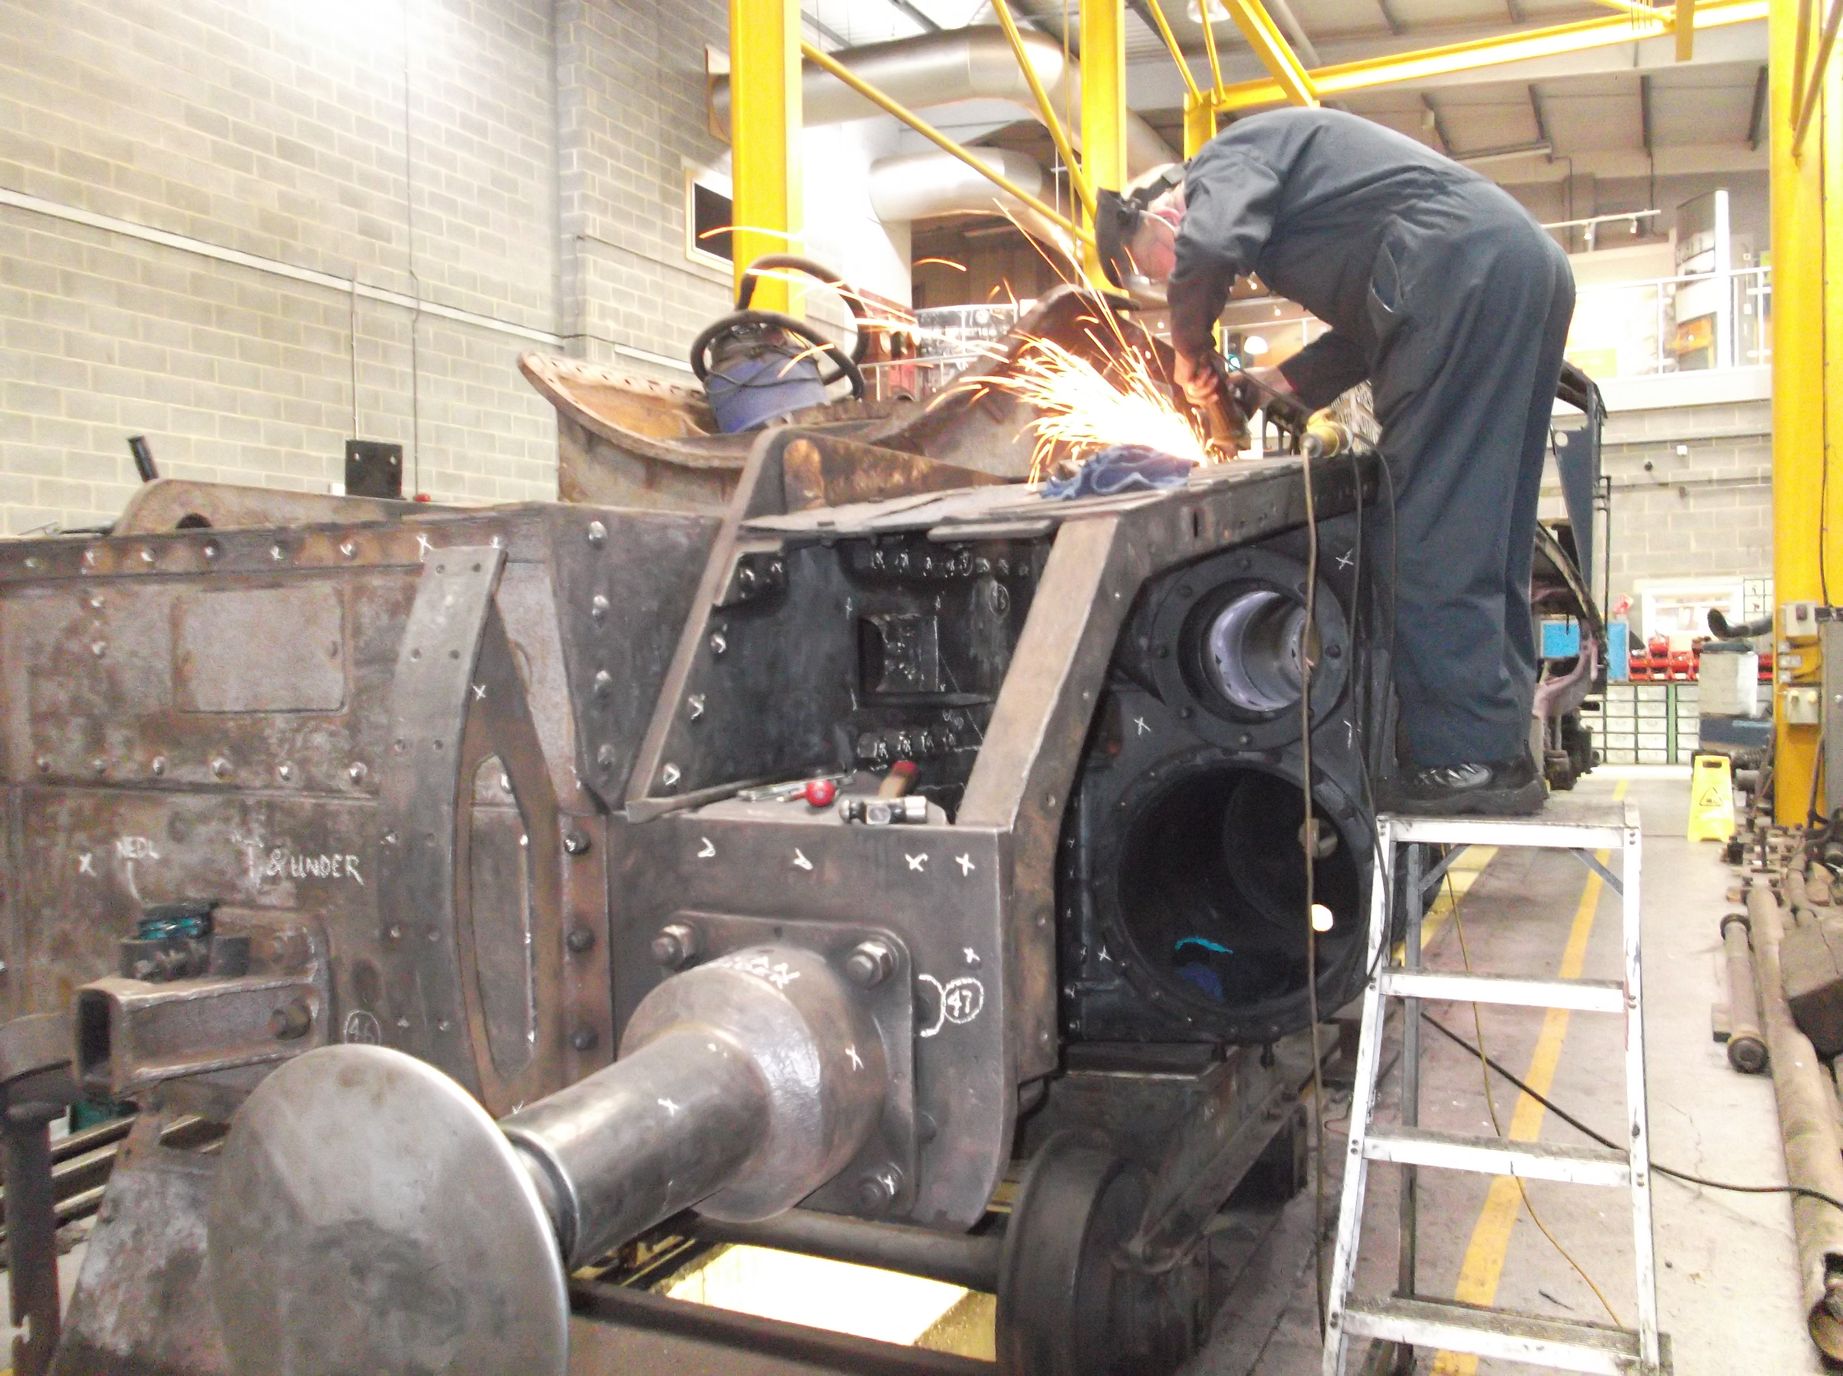 Bob Shearman cutting the footplating above the left hand cylinder to allow access to change a bolt.